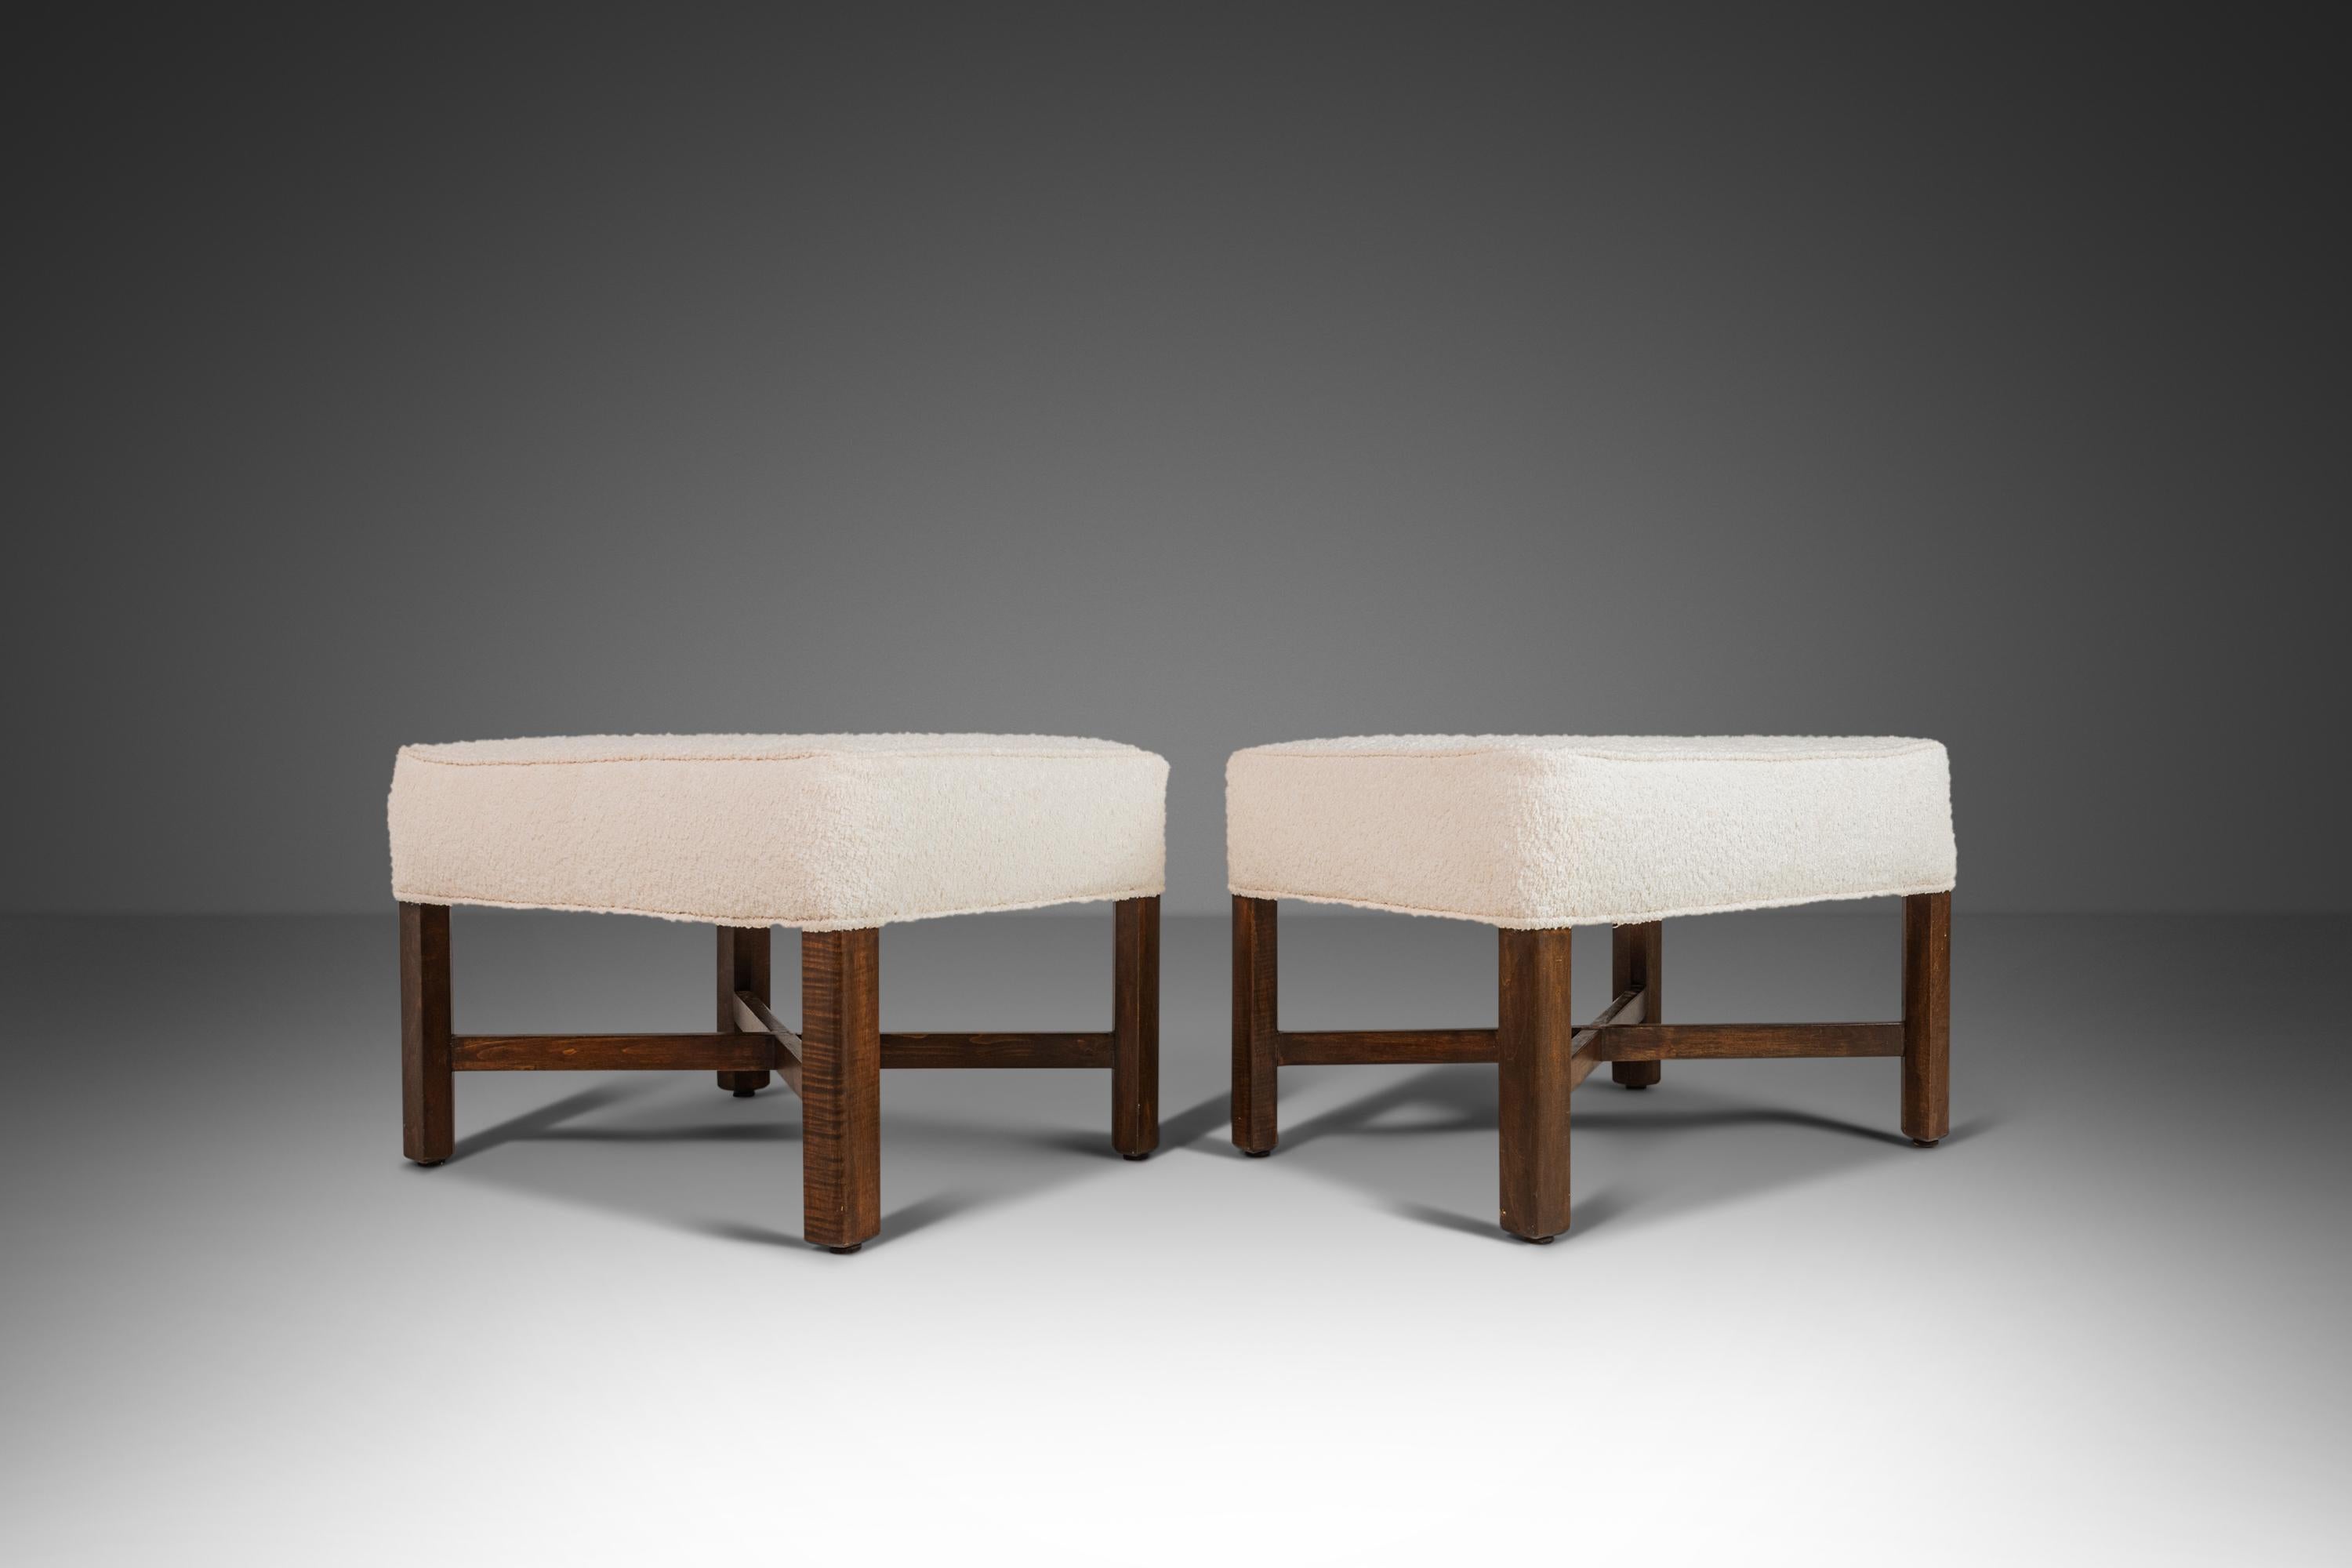 This is a pair of ottomans / footstools designed in the manner of Edward Wormley for Dunbar. The fabric has been newly upholsterd in Knoll Fabrics white bouclé. The wooden walnut base has a striking cross legged design. circa